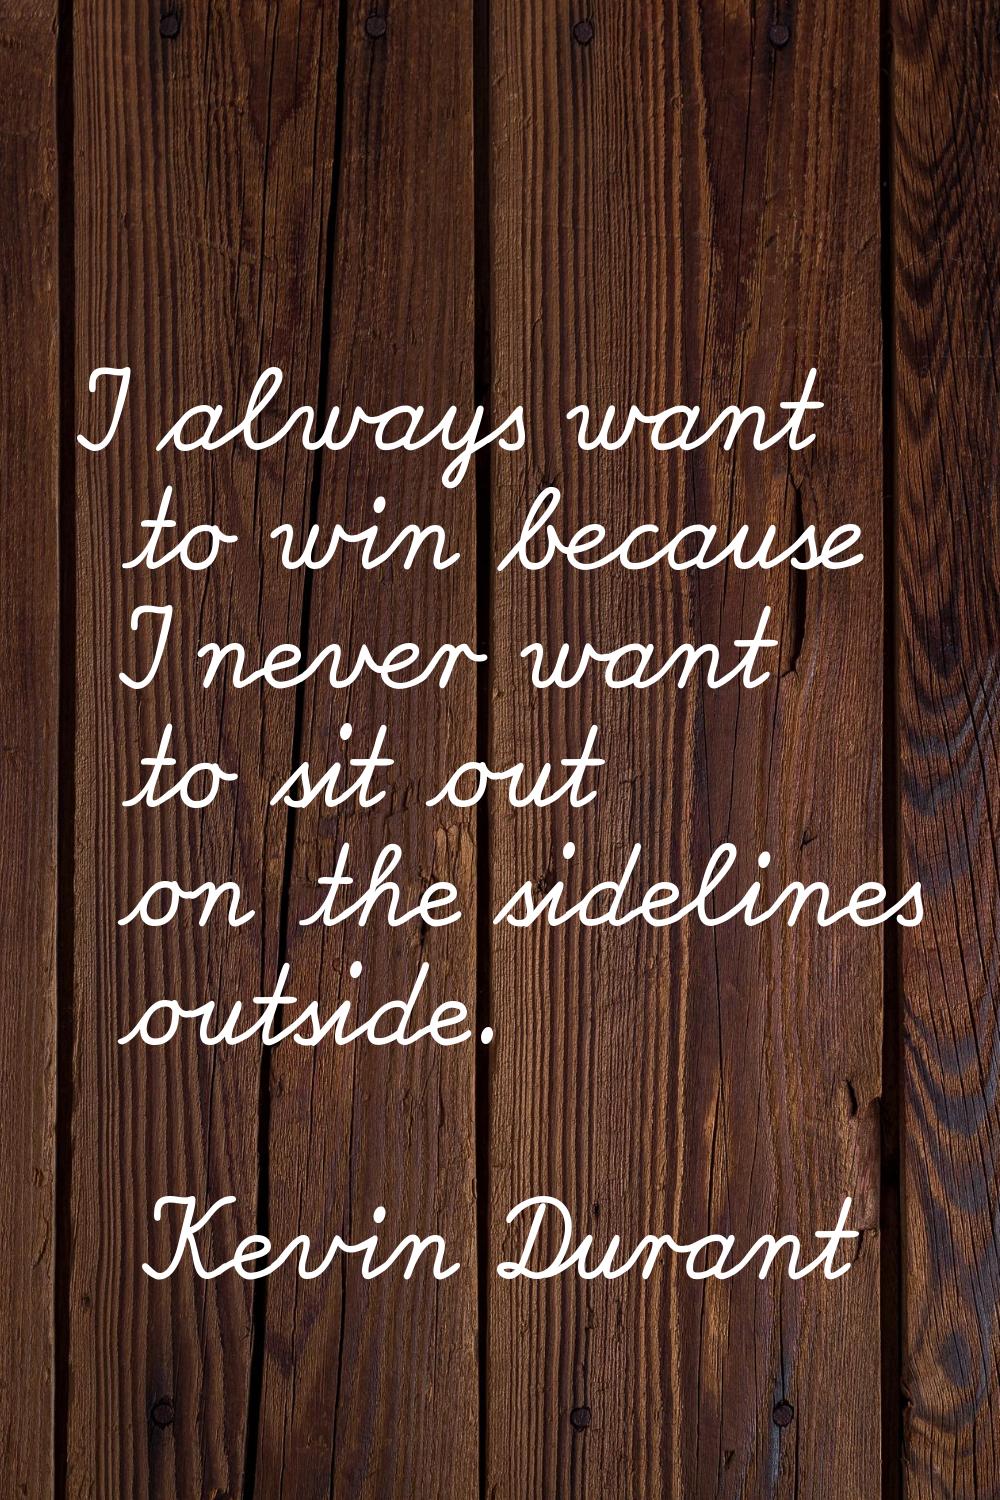 I always want to win because I never want to sit out on the sidelines outside.